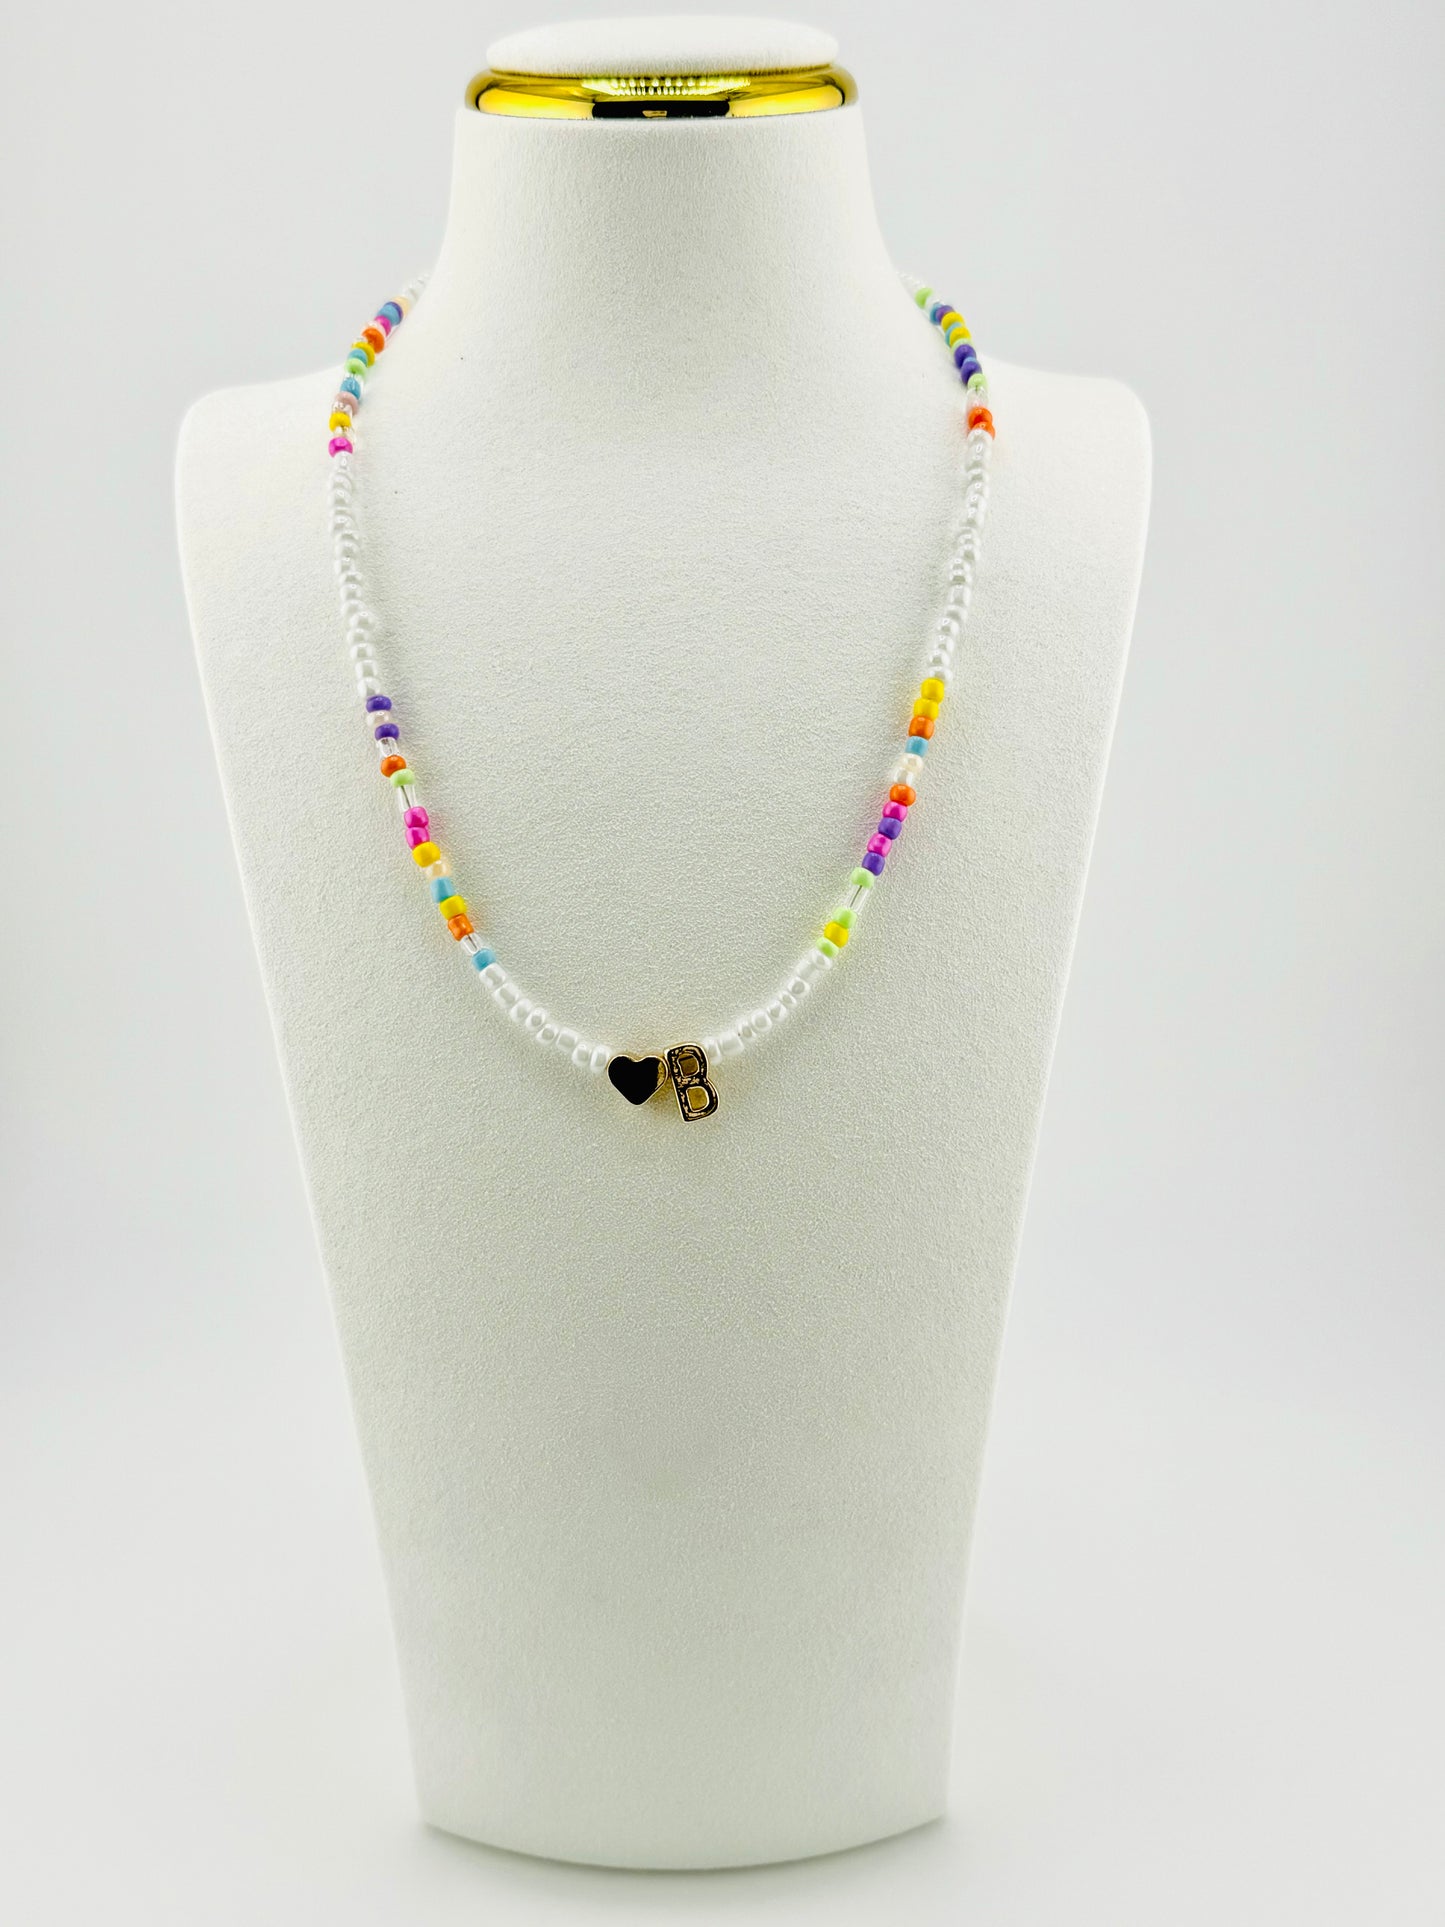 B beaded Initial necklace in white and pastel colors